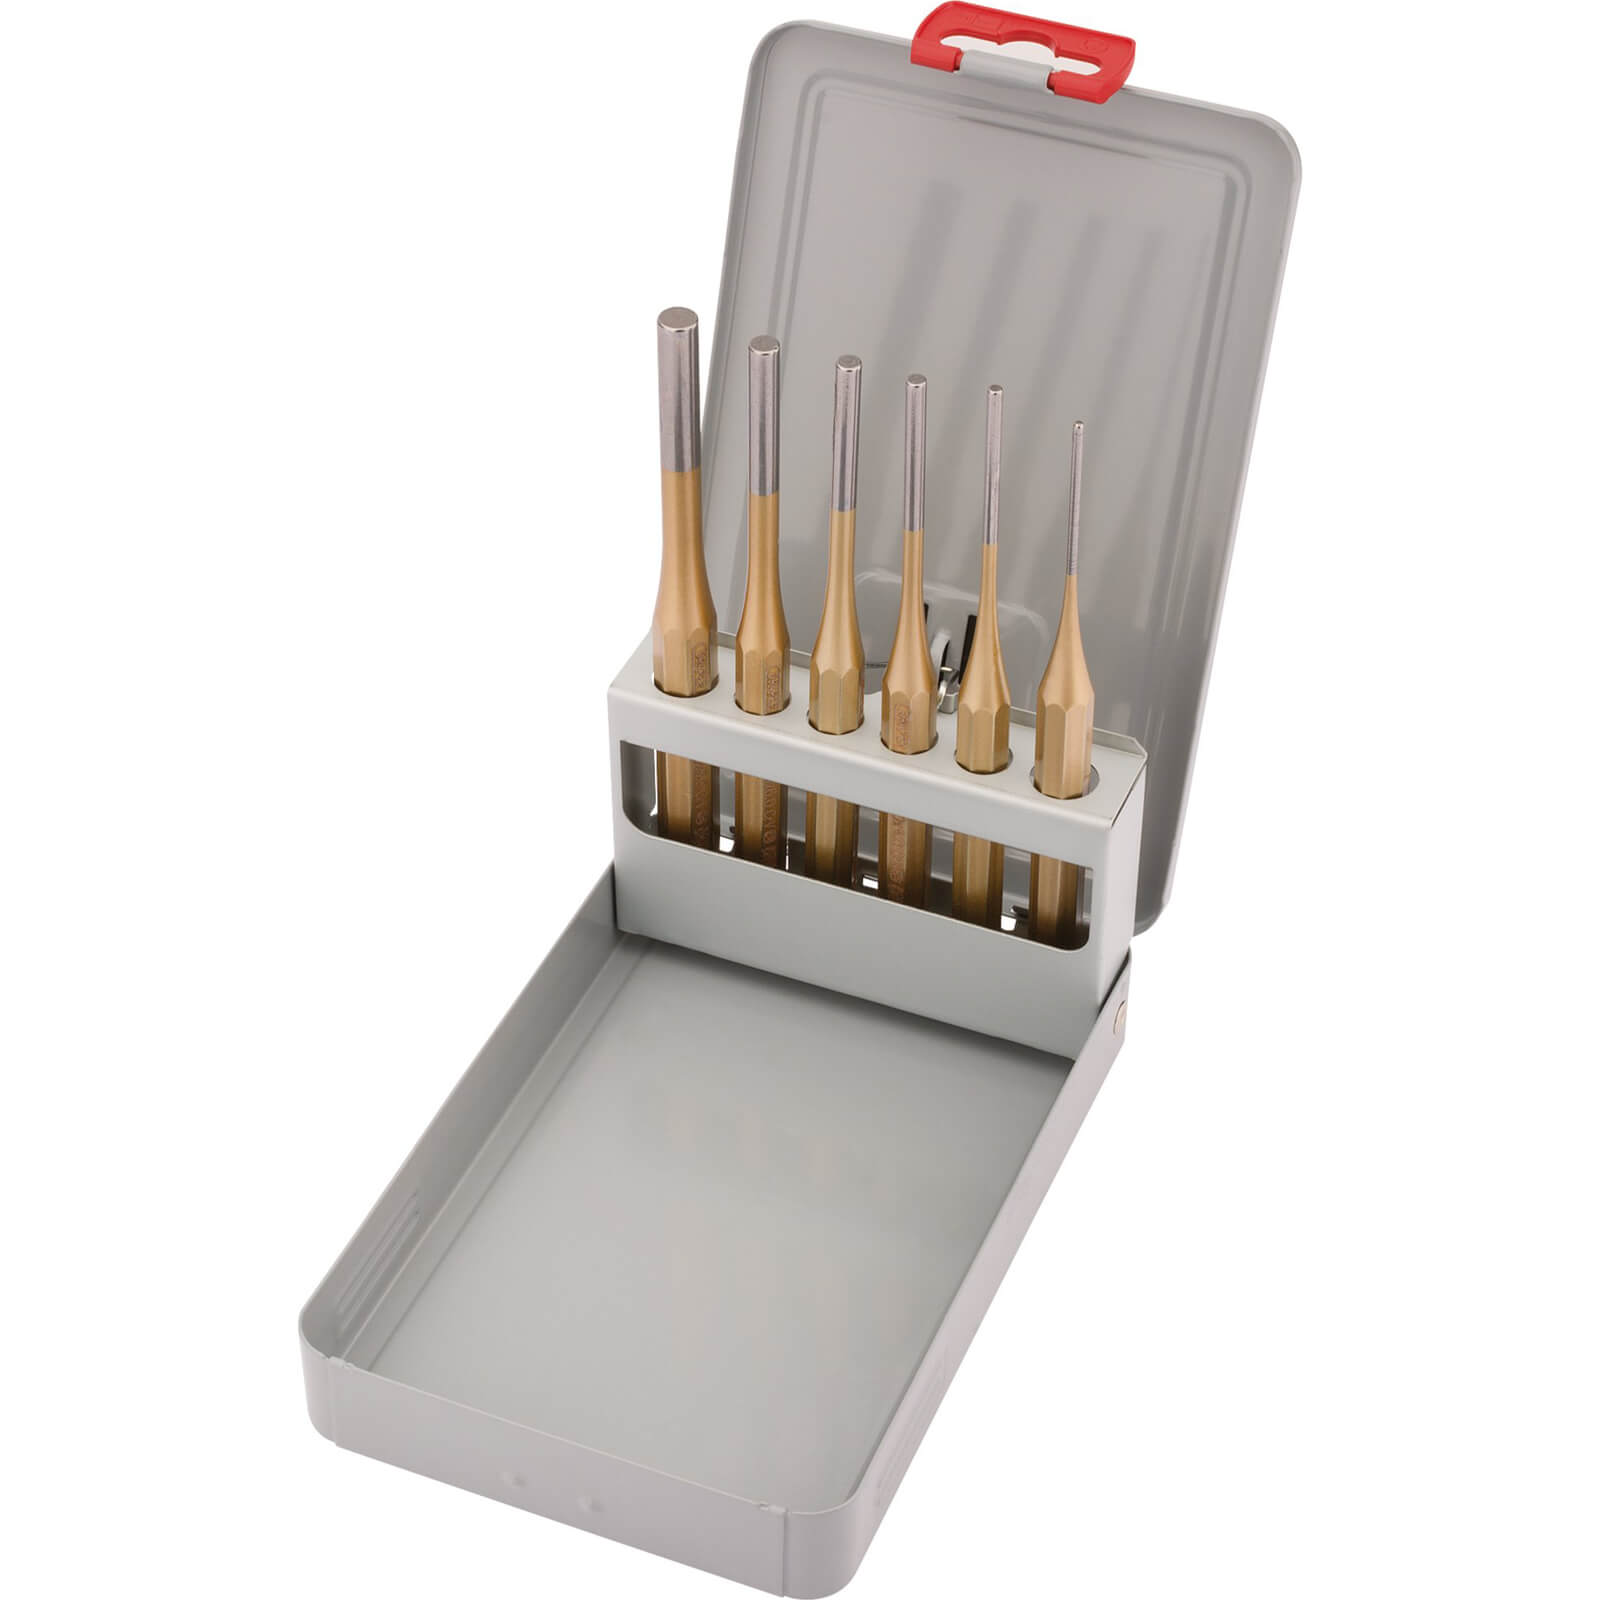 Image of Draper Expert 6 Piece Parallel Pin Punch Set